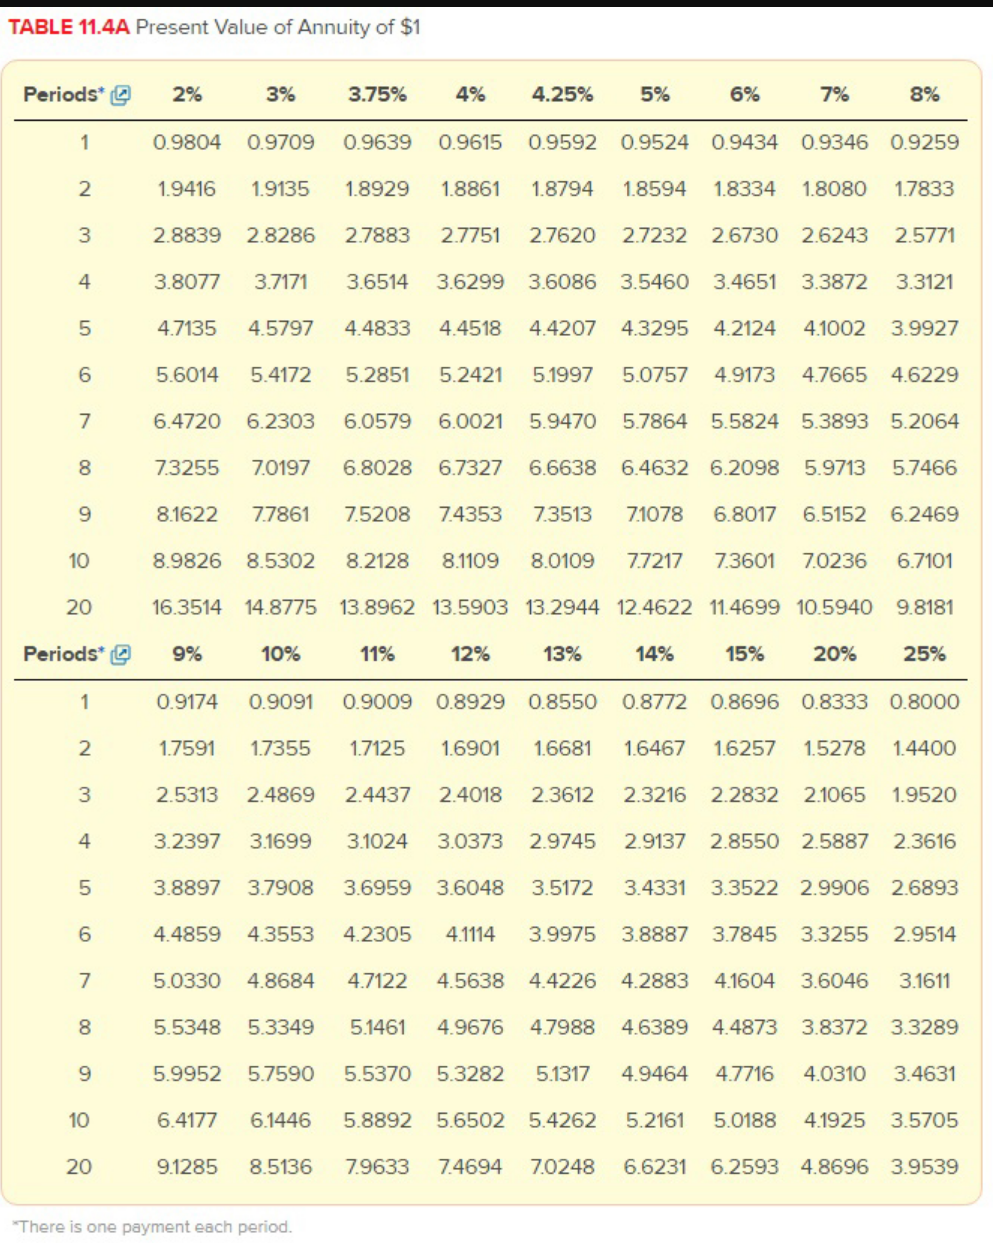 TABLE 11.4A Present Value of Annuity of $1
Periods* e
2%
3%
3.75%
4%
4.25%
5%
6%
7%
8%
0.9804
0.9709
0.9639
0.9615
0.9592 0.9524
0.9434
0.9346 0.9259
1.9416
1.9135
1.8929
1.8861
1.8794
1.8594
1.8334
1.8080
1.7833
3
2.8839
2.8286
2.7883
2.7751
2.7620
2.7232
2.6730
2.6243
2.5771
4
3.8077
3.7171
3.6514
3.6299
3.6086 3.5460
3.4651
3.3872
3.3121
4.7135
4.5797
4.4833
4.4518
4.4207 4.3295
4.2124
4.1002 3.9927
5.6014
5.4172
5.2851
5.2421
5.1997
5.0757
4.9173
4.7665 4.6229
6.4720
6.2303
6.0579
6.0021
5.9470
5.7864
5.5824 5.3893 5.2064
7.3255
7.0197
6.8028
6.7327
6.6638
6.4632 6.2098
5.9713
5.7466
8.1622
7.7861
7.5208
7.4353
7.3513
7.1078
6.8017
6.5152 6.2469
10
8.9826
8.5302
8.2128
8.1109
8.0109
77217
7.3601
7.0236
6.7101
20
16.3514
14.8775 13.8962 13.5903 13.2944 12.4622 11.4699 10.5940
9.8181
Periods* O
10%
11%
12%
13%
14%
15%
20%
25%
0.9174
0.9091
0.9009
0.8929
0.8550
0.8772
0.8696
0.8333 0.8000
1.7591
1.7355
1.7125
1.6901
1.6681
1.6467
1.6257
1.5278
1.4400
2.5313
2.4869
2.4437
2.4018
2.3612
2.3216
2.2832
2.1065
1.9520
3.2397
3.1699
3.1024
3.0373
2.9745
2.9137 2.8550 2.5887
2.3616
3.8897
3.7908
3.6959
3.6048
3.5172
3.4331
3.3522 2.9906 2.6893
4.4859
4.3553
4.2305
4.1114
3.9975 3.8887
3.7845
3.3255
2.9514
5.0330
4.8684
4.7122
4.5638
4.4226 4.2883
4.1604
3.6046
3.1611
5.5348
5.3349
5.1461
4.9676
4.7988
4.6389
4.4873
3.8372 3.3289
5.9952
5.7590
5.5370
5.3282
5.1317
4.9464
4.7716
4.0310
3.4631
10
6.4177
6.1446
5.8892
5.6502
5.4262
5.2161
5.0188
4.1925
3.5705
9.1285
8.5136
7.9633
7.4694
7.0248
6.6231
6.2593 4.8696 3.9539
"There is one payment each period.
LO
6,
LO
20
4.
